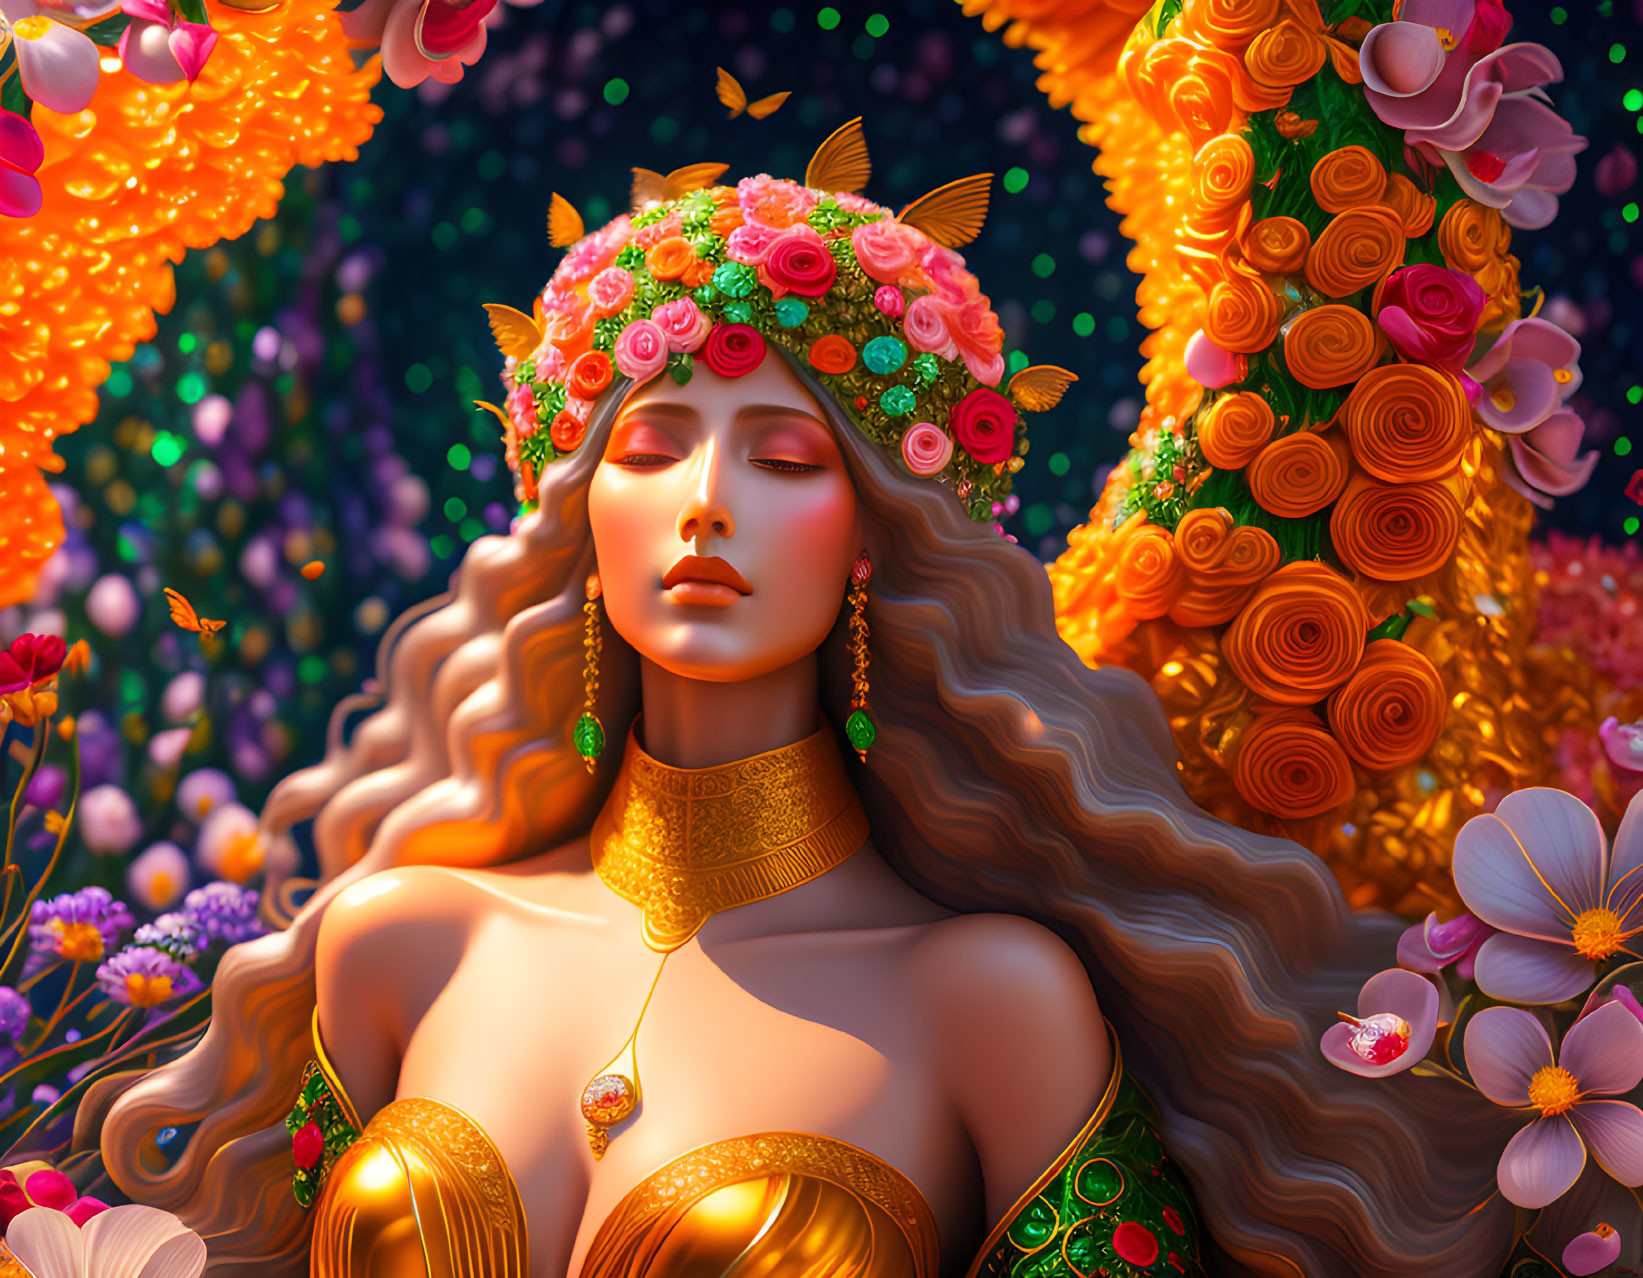 Woman in floral crown and gold attire surrounded by vibrant flowers.